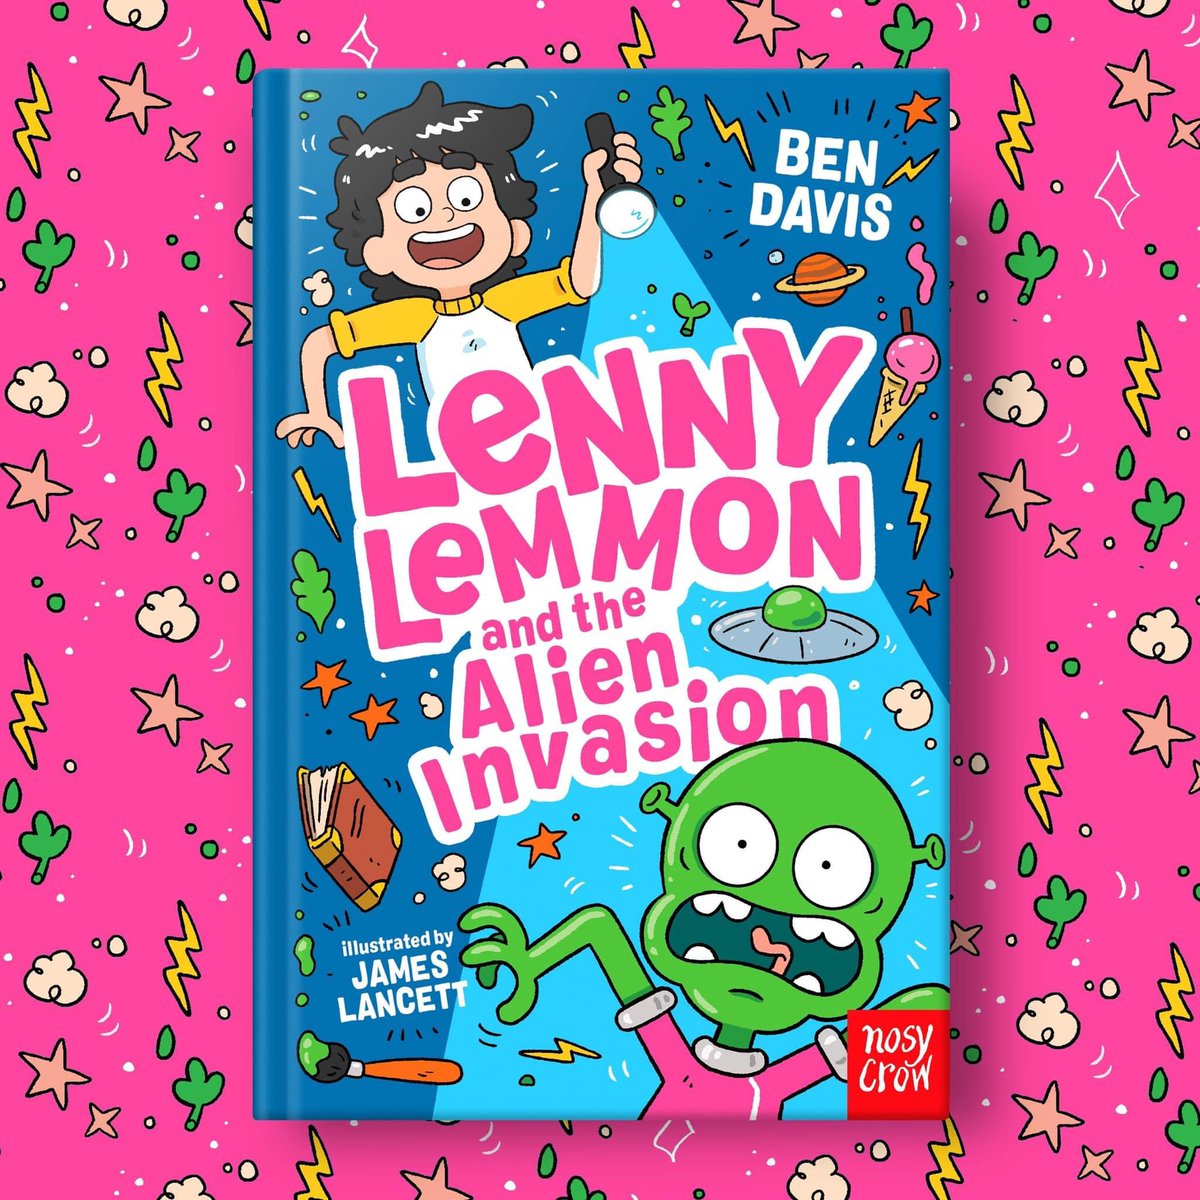 LENNY LEMMON AND THE ALIEN INVASION by me and @jameslancett is out today! 👽 Suitable for 7+ 👽Lots of anarchic goodness 👽Aliens